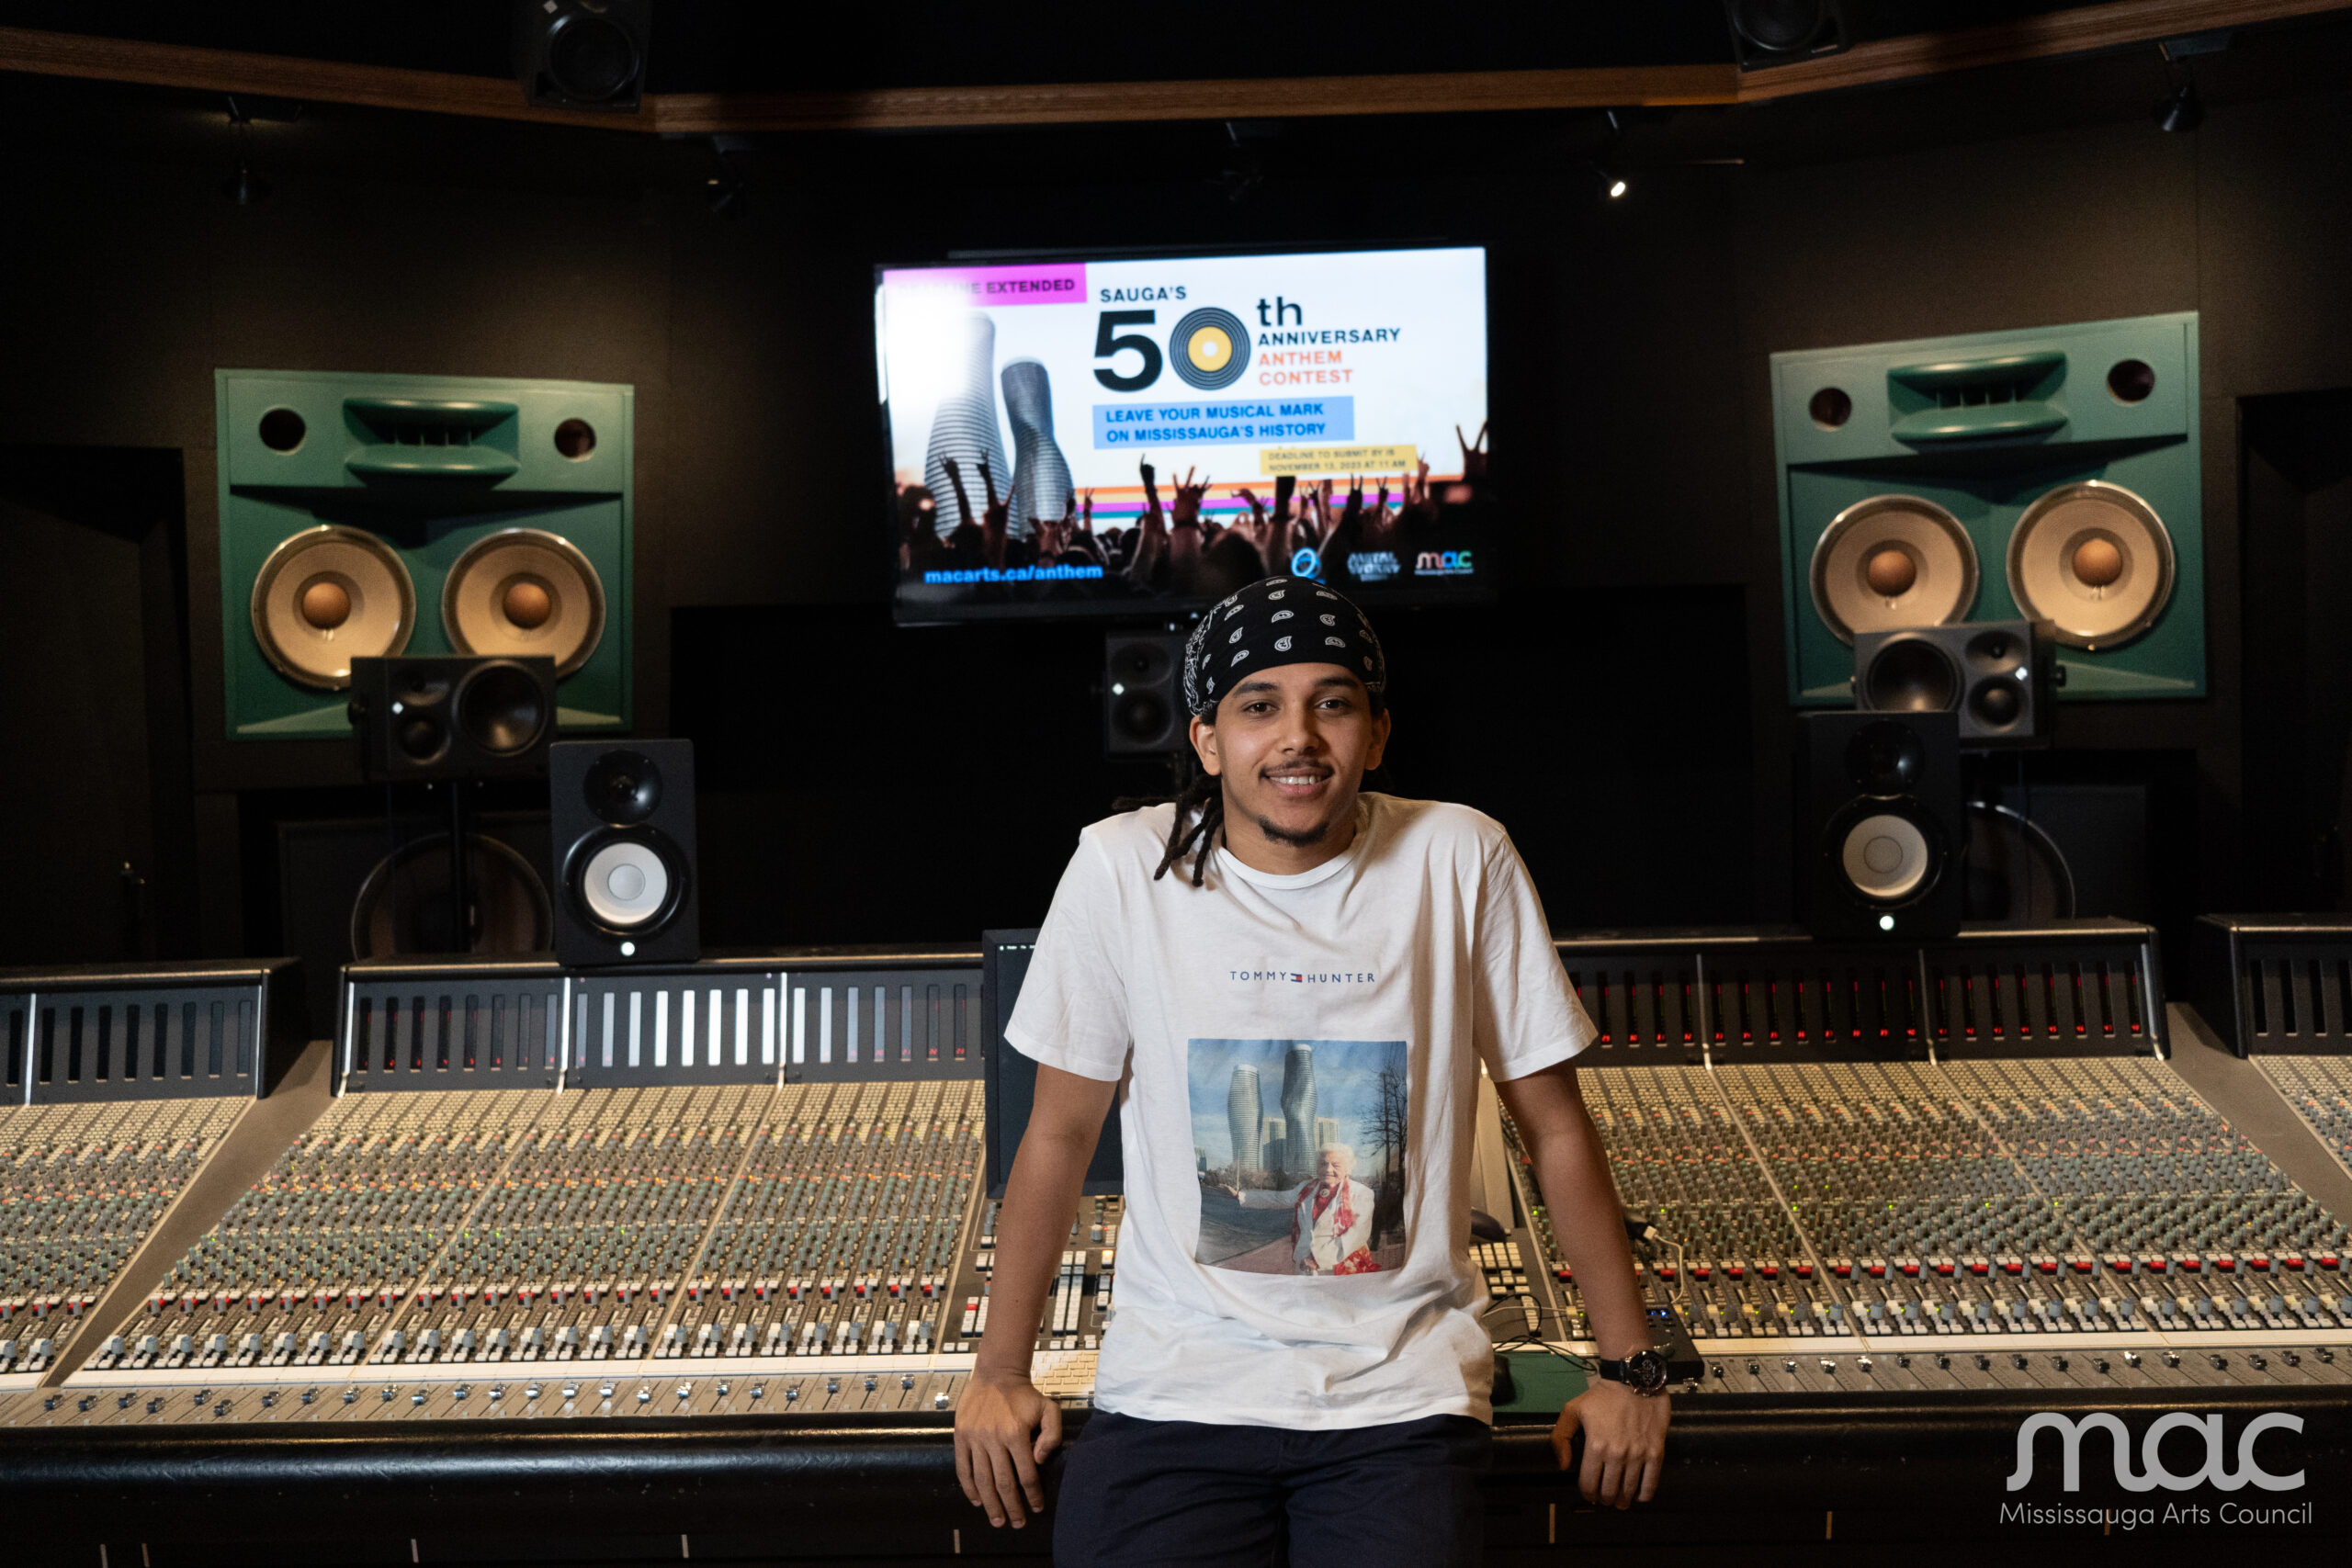 Mikey Bloom; emerging rapper creates anthem for Mississauga’s 50th anniversary